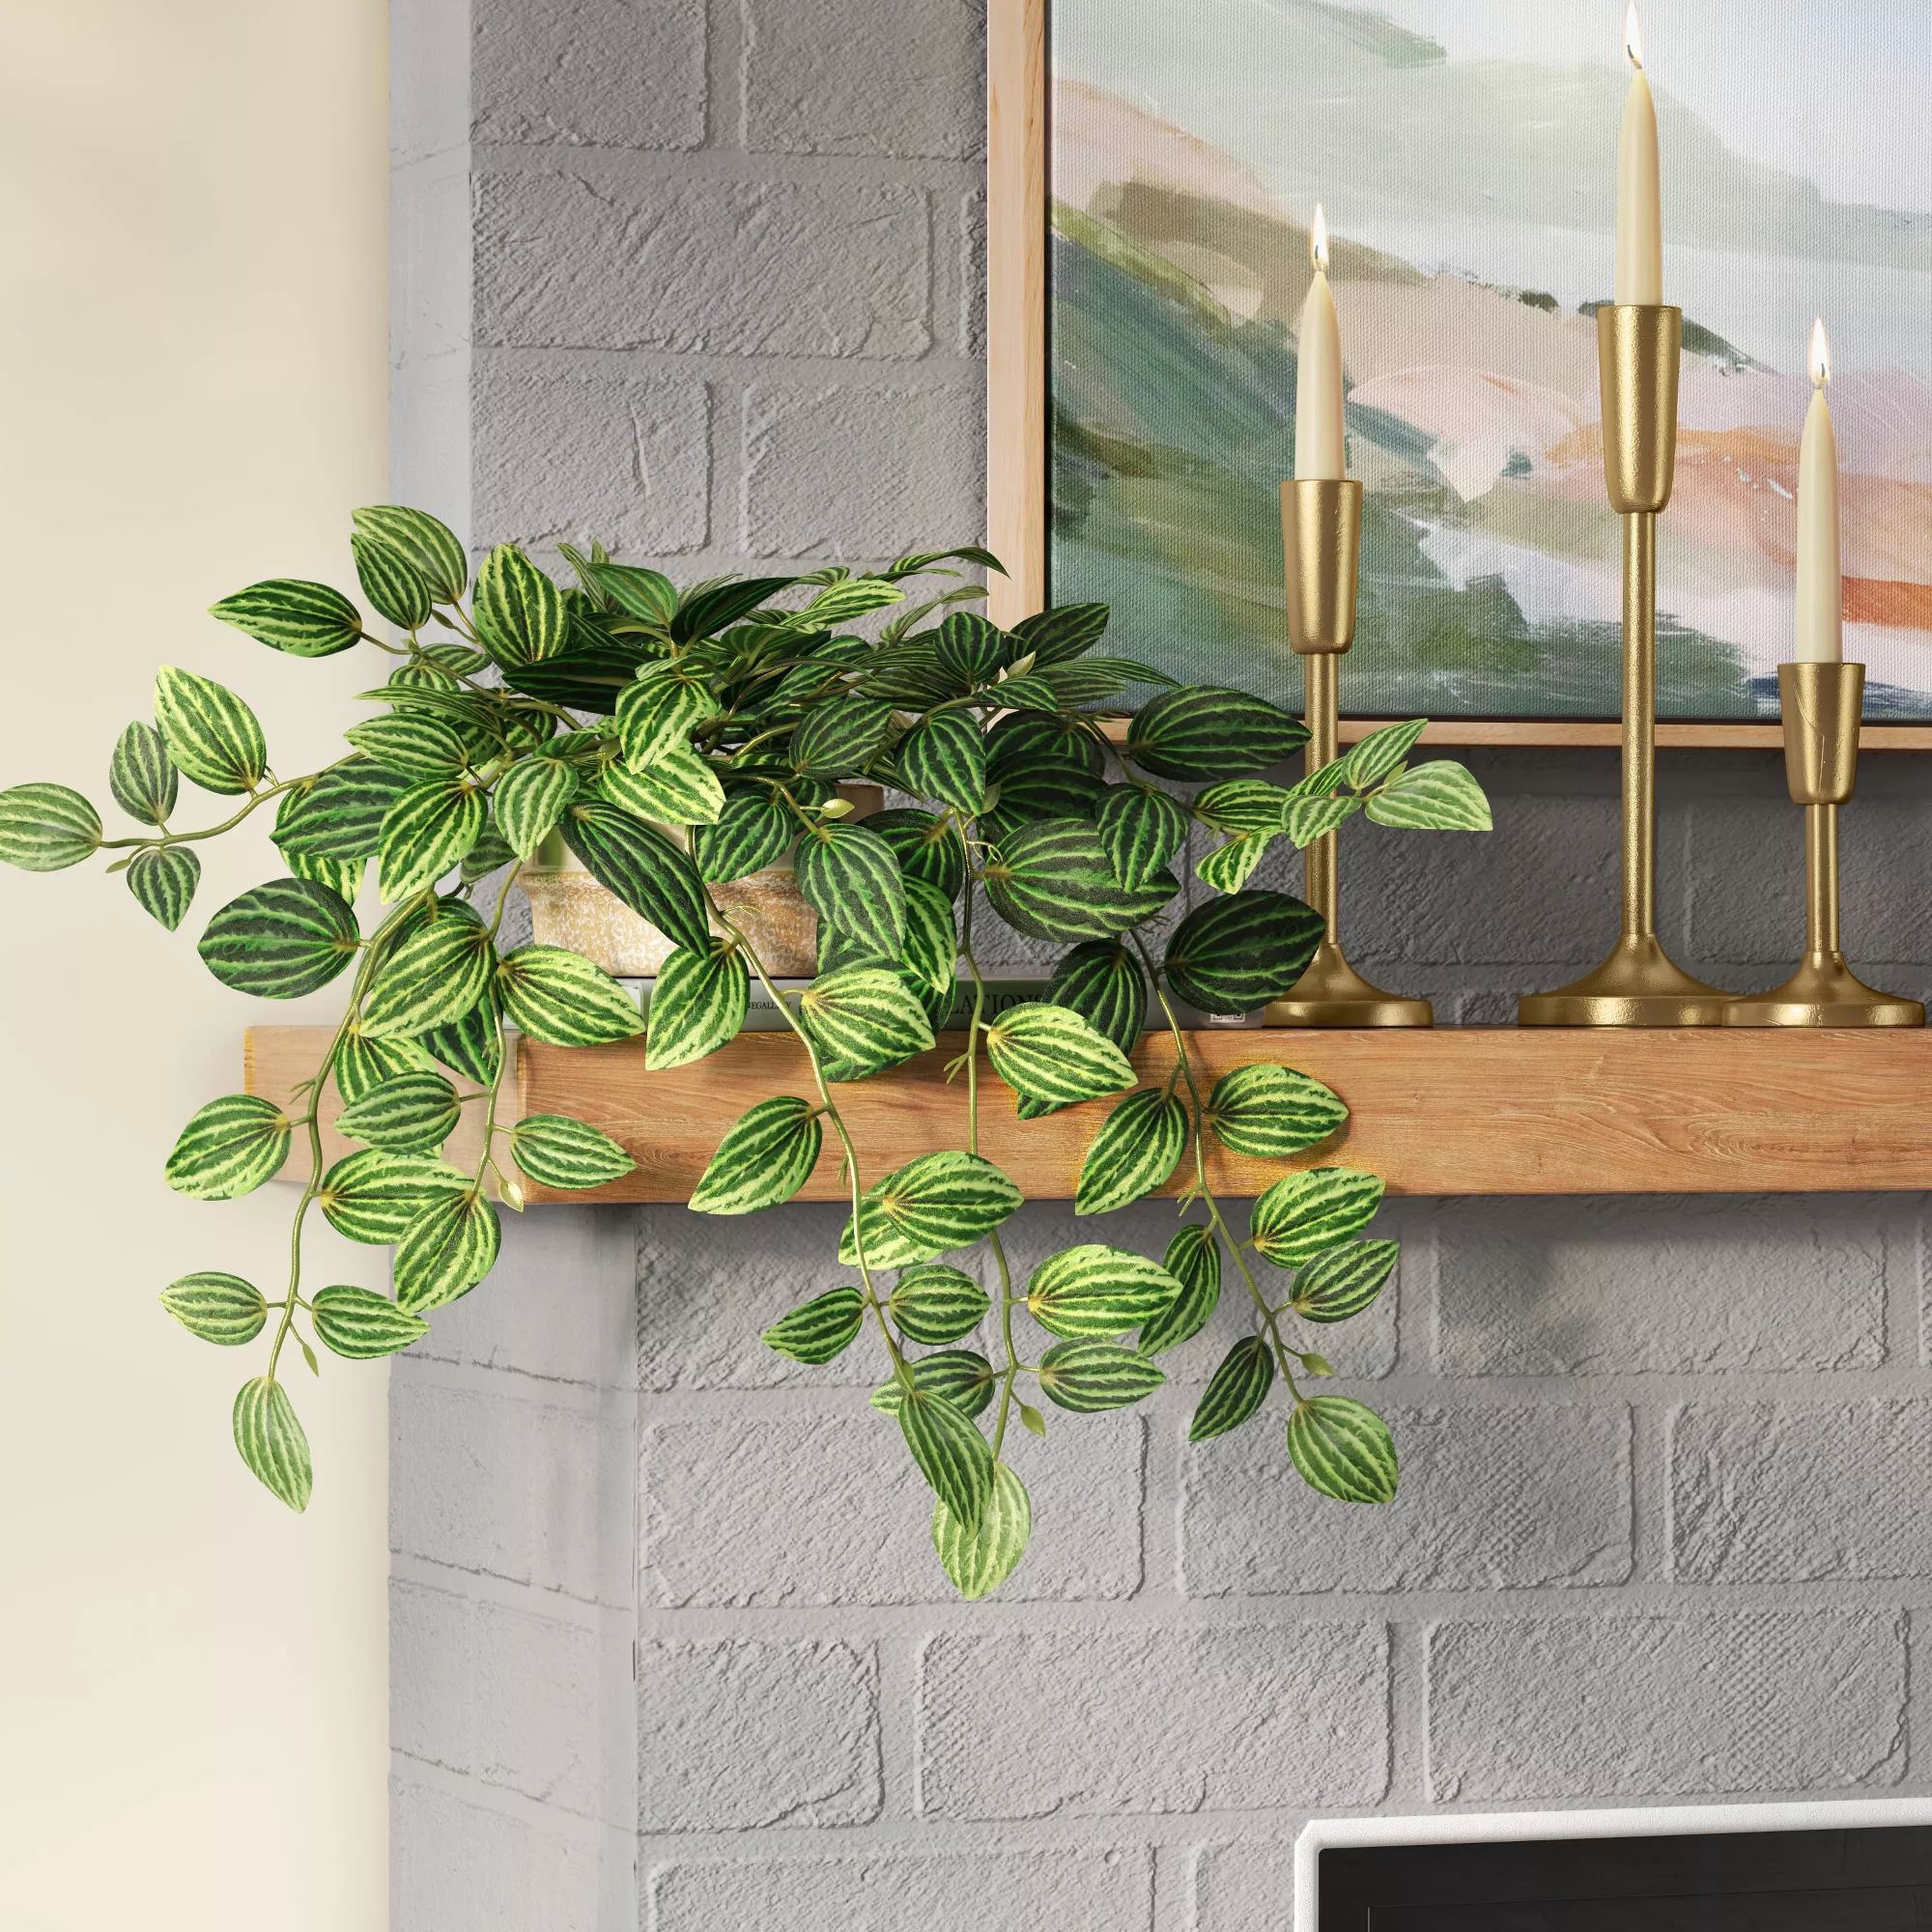 Variegated faux trailing houseplant on a wooden shelf accompanied by a brass candlestick holder